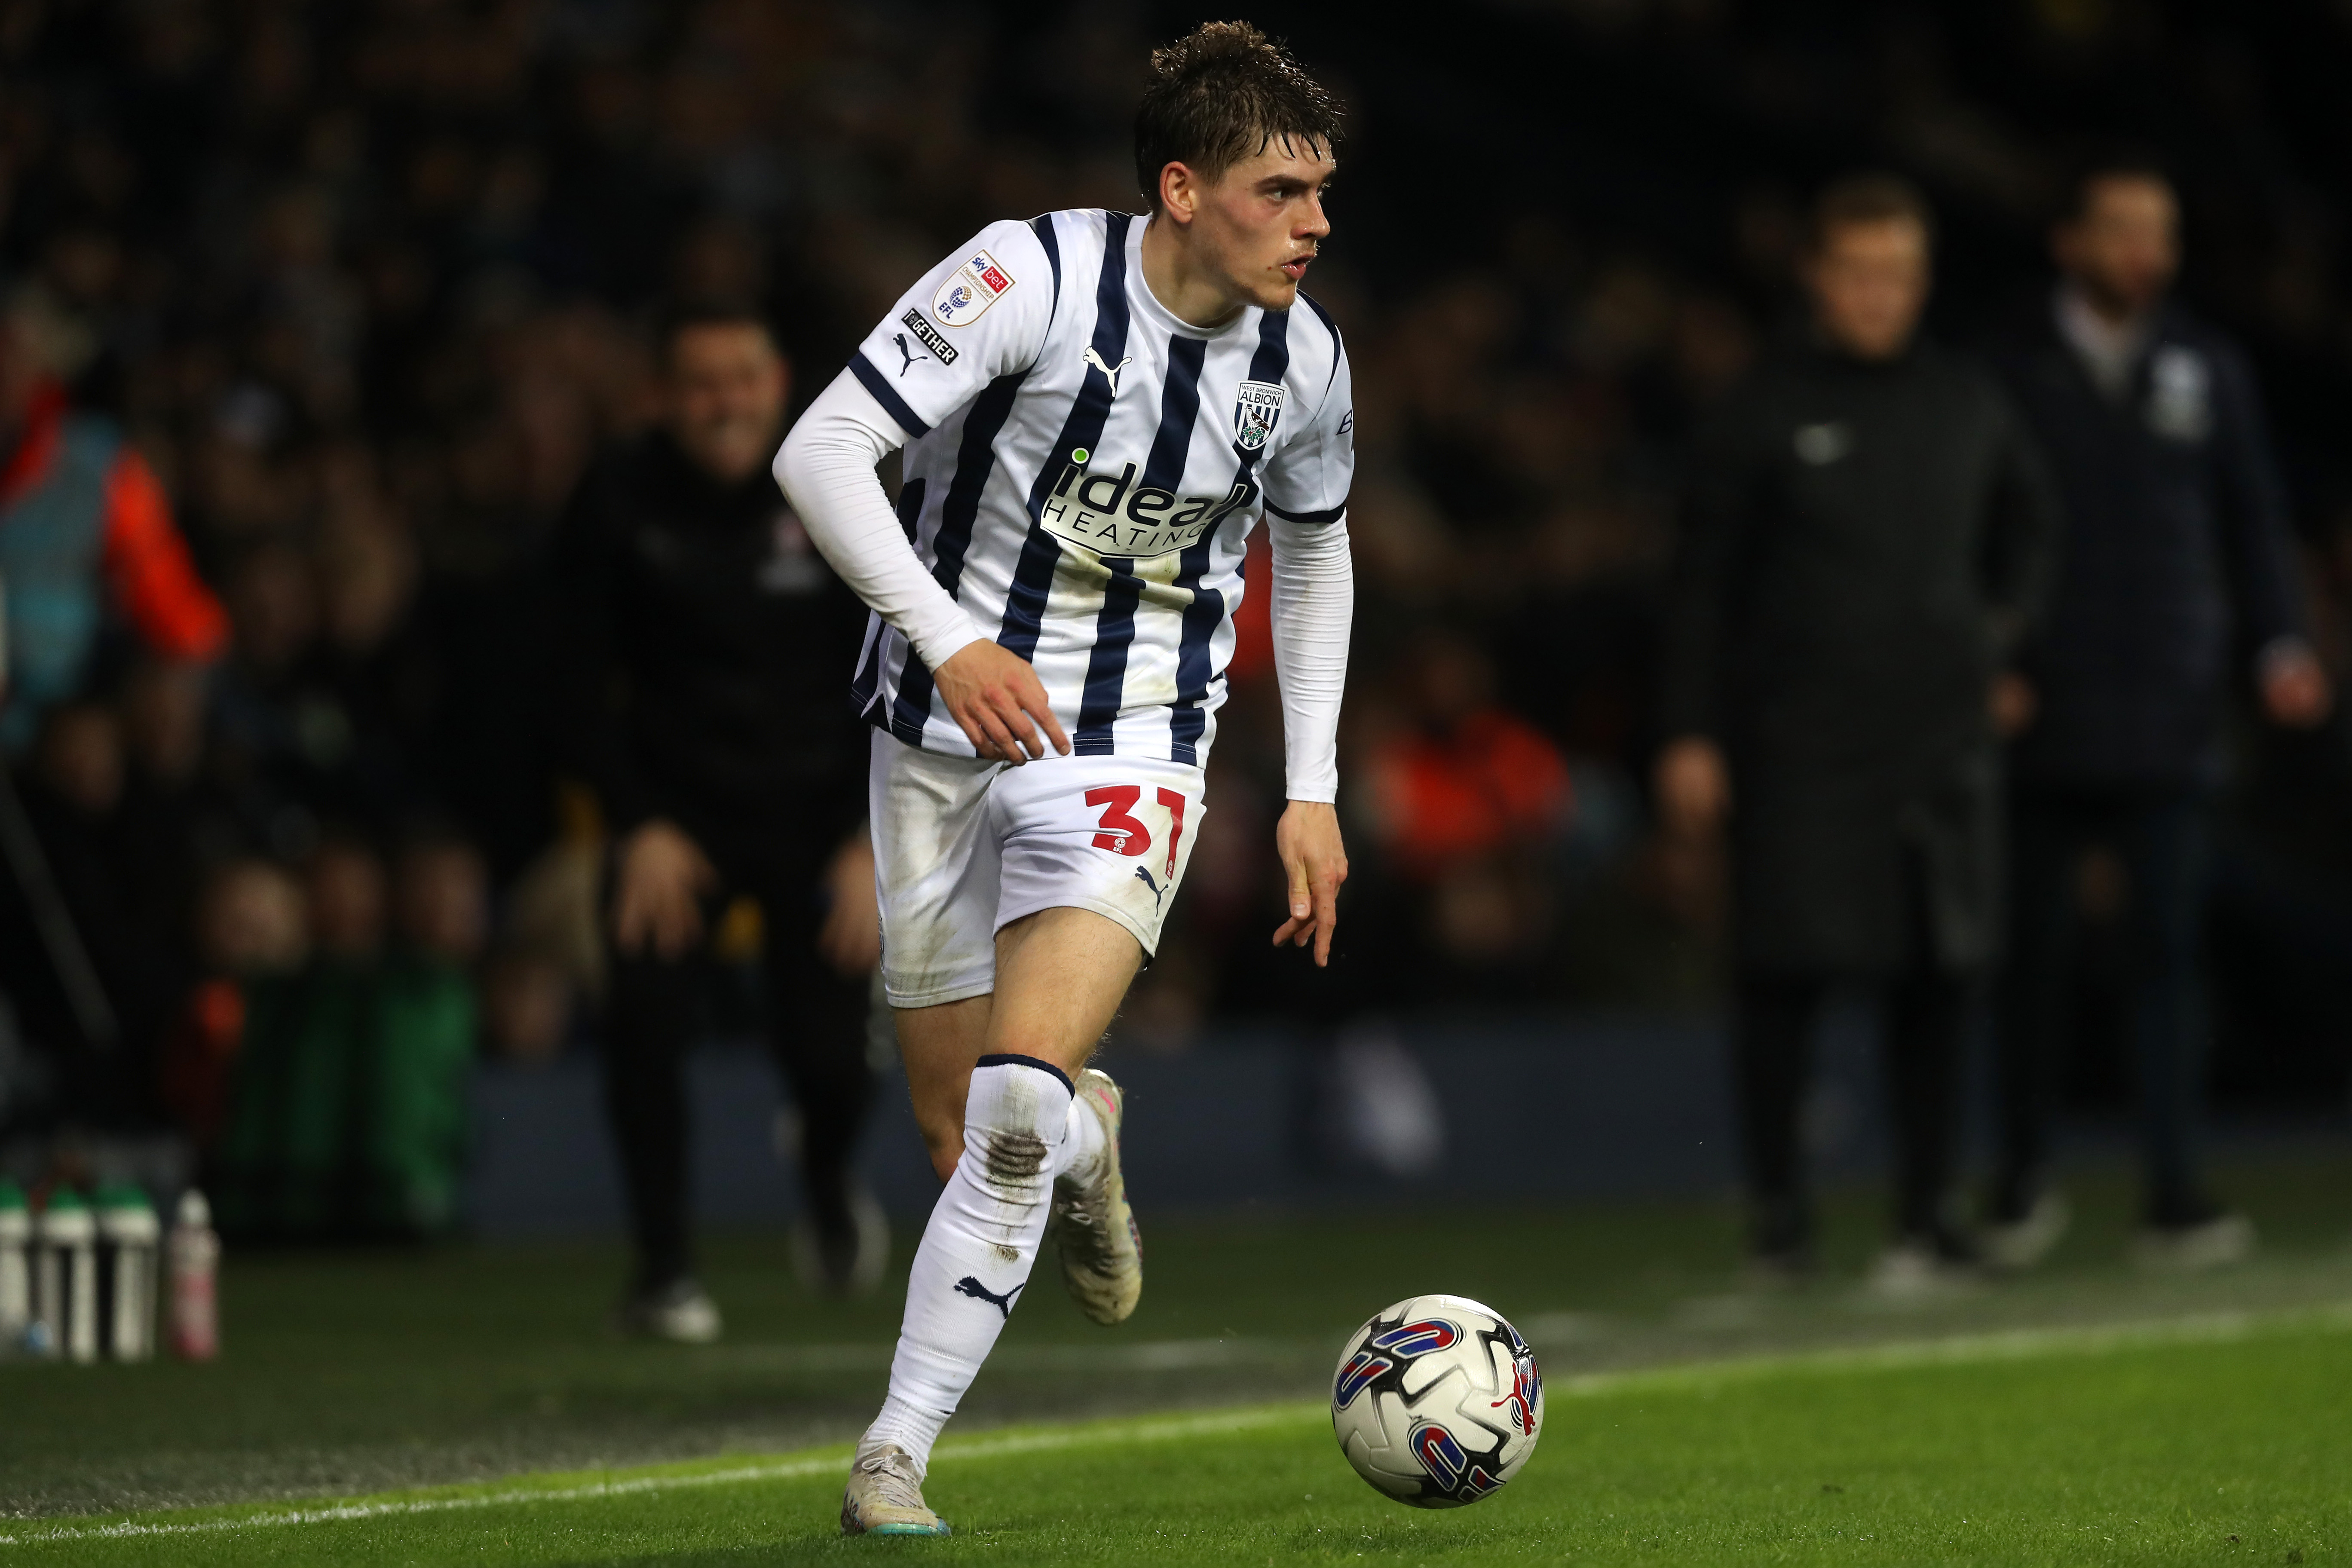 Tom Fellows running with the ball wearing the home Albion kit at The Hawthorns